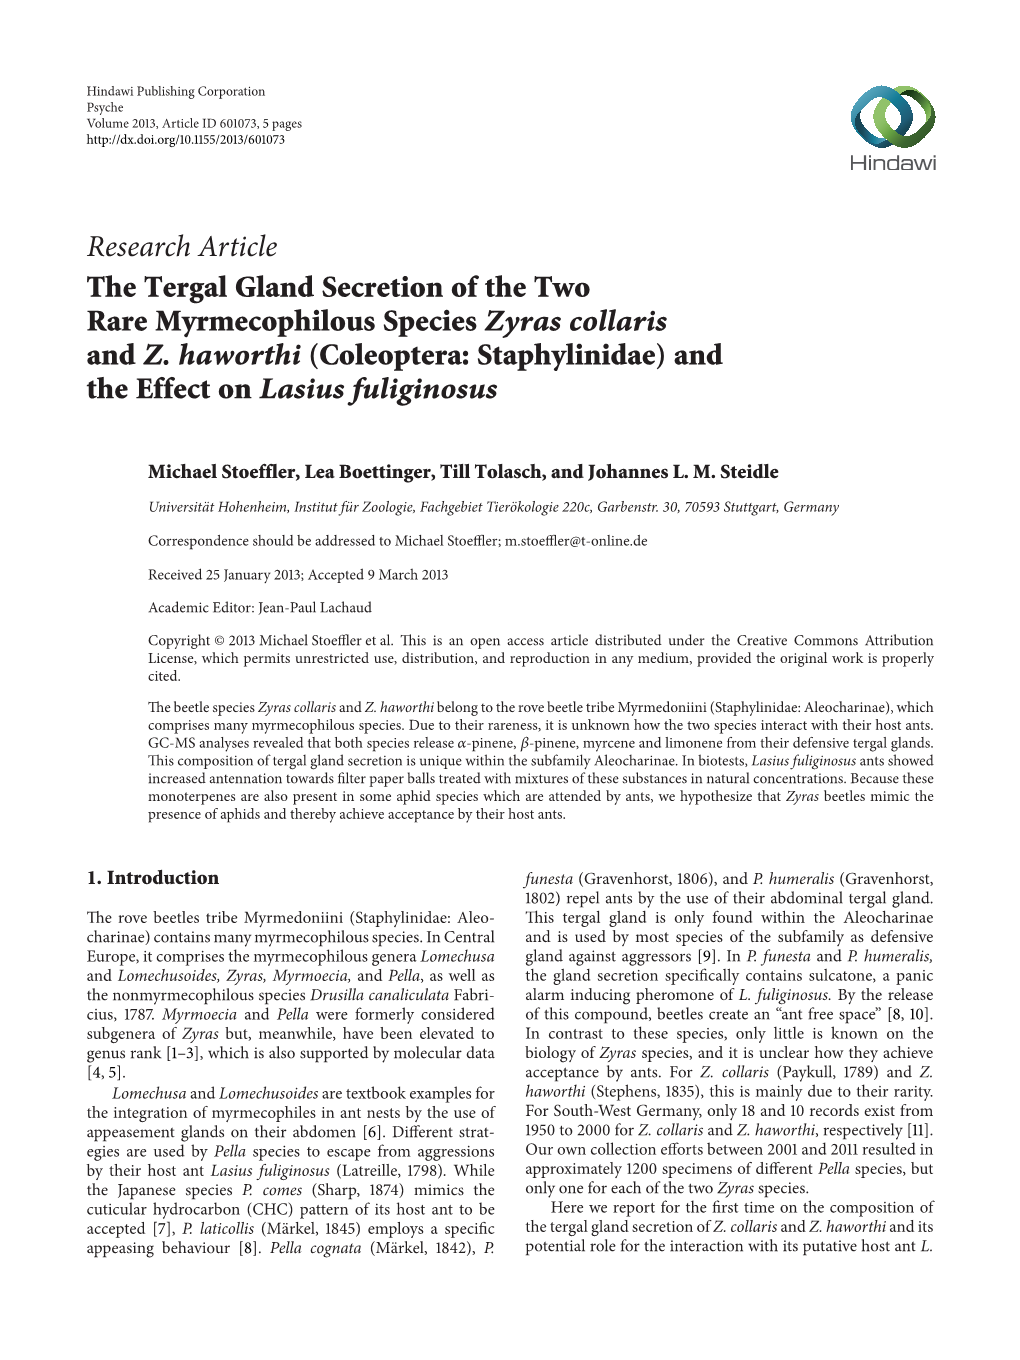 The Tergal Gland Secretion of the Two Rare Myrmecophilous Species Zyras Collaris and Z